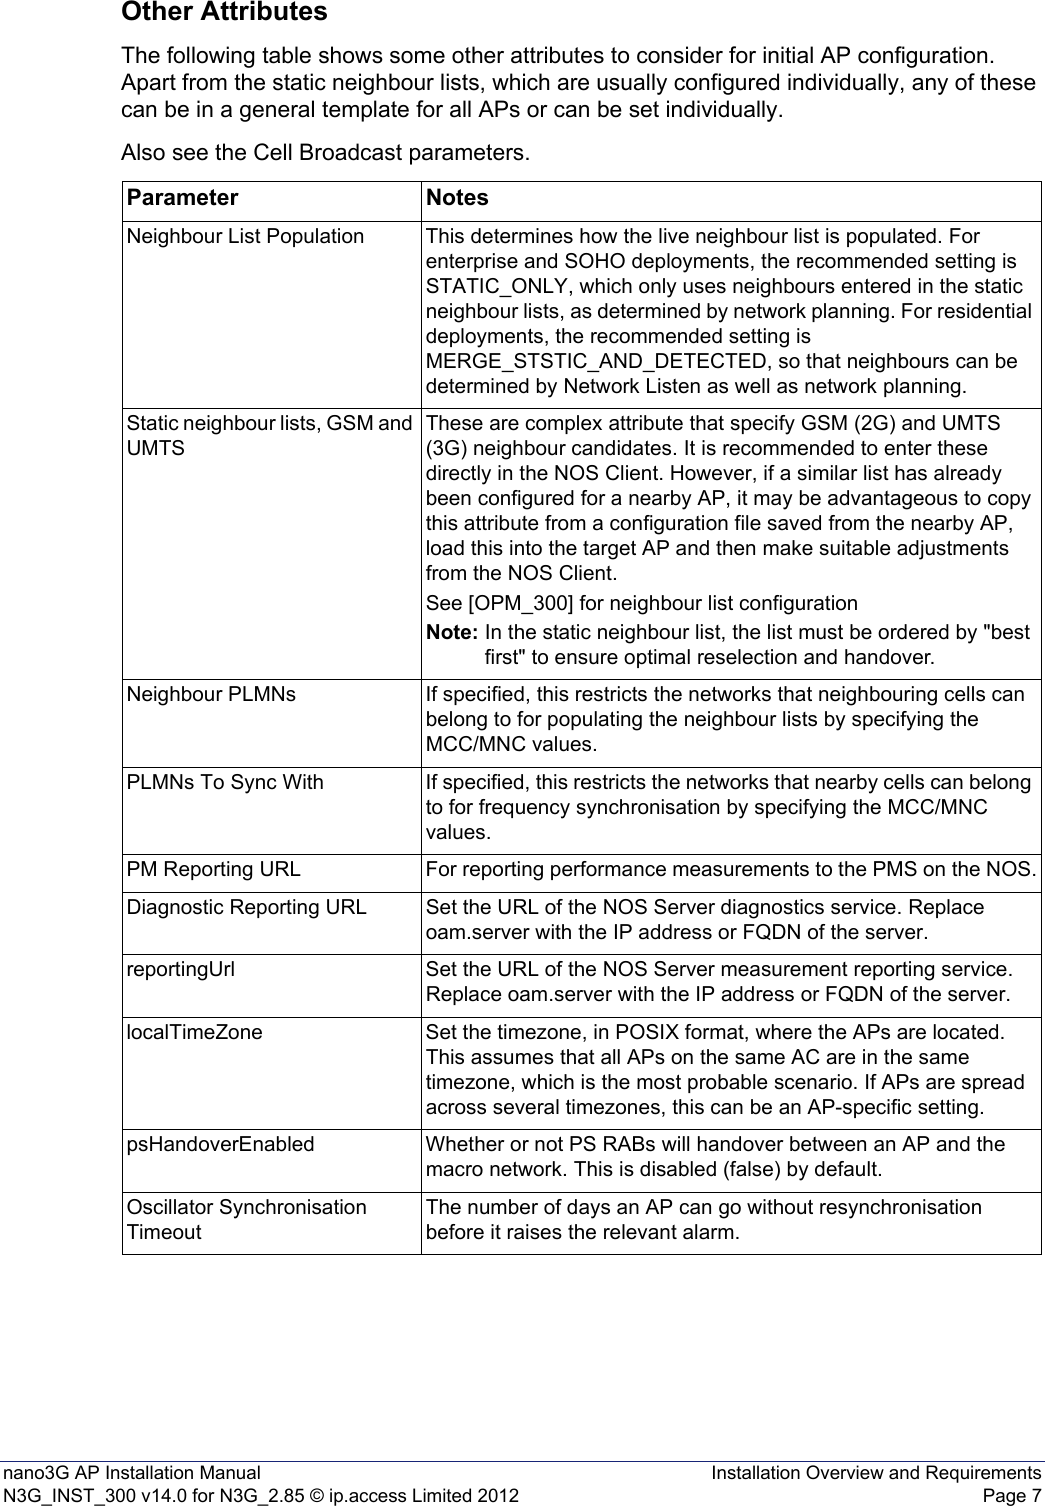 nano3G AP Installation Manual Installation Overview and RequirementsN3G_INST_300 v14.0 for N3G_2.85 © ip.access Limited 2012 Page 7Other AttributesThe following table shows some other attributes to consider for initial AP configuration. Apart from the static neighbour lists, which are usually configured individually, any of these can be in a general template for all APs or can be set individually.Also see the Cell Broadcast parameters.Parameter NotesNeighbour List Population This determines how the live neighbour list is populated. For enterprise and SOHO deployments, the recommended setting is STATIC_ONLY, which only uses neighbours entered in the static neighbour lists, as determined by network planning. For residential deployments, the recommended setting is MERGE_STSTIC_AND_DETECTED, so that neighbours can be determined by Network Listen as well as network planning. Static neighbour lists, GSM and UMTSThese are complex attribute that specify GSM (2G) and UMTS (3G) neighbour candidates. It is recommended to enter these directly in the NOS Client. However, if a similar list has already been configured for a nearby AP, it may be advantageous to copy this attribute from a configuration file saved from the nearby AP, load this into the target AP and then make suitable adjustments from the NOS Client.See [OPM_300] for neighbour list configurationNote: In the static neighbour list, the list must be ordered by &quot;best first&quot; to ensure optimal reselection and handover.Neighbour PLMNs If specified, this restricts the networks that neighbouring cells can belong to for populating the neighbour lists by specifying the MCC/MNC values.PLMNs To Sync With If specified, this restricts the networks that nearby cells can belong to for frequency synchronisation by specifying the MCC/MNC values.PM Reporting URL For reporting performance measurements to the PMS on the NOS.Diagnostic Reporting URL Set the URL of the NOS Server diagnostics service. Replace oam.server with the IP address or FQDN of the server.reportingUrl Set the URL of the NOS Server measurement reporting service. Replace oam.server with the IP address or FQDN of the server.localTimeZone Set the timezone, in POSIX format, where the APs are located. This assumes that all APs on the same AC are in the same timezone, which is the most probable scenario. If APs are spread across several timezones, this can be an AP-specific setting. psHandoverEnabled Whether or not PS RABs will handover between an AP and the macro network. This is disabled (false) by default. Oscillator Synchronisation TimeoutThe number of days an AP can go without resynchronisation before it raises the relevant alarm. 